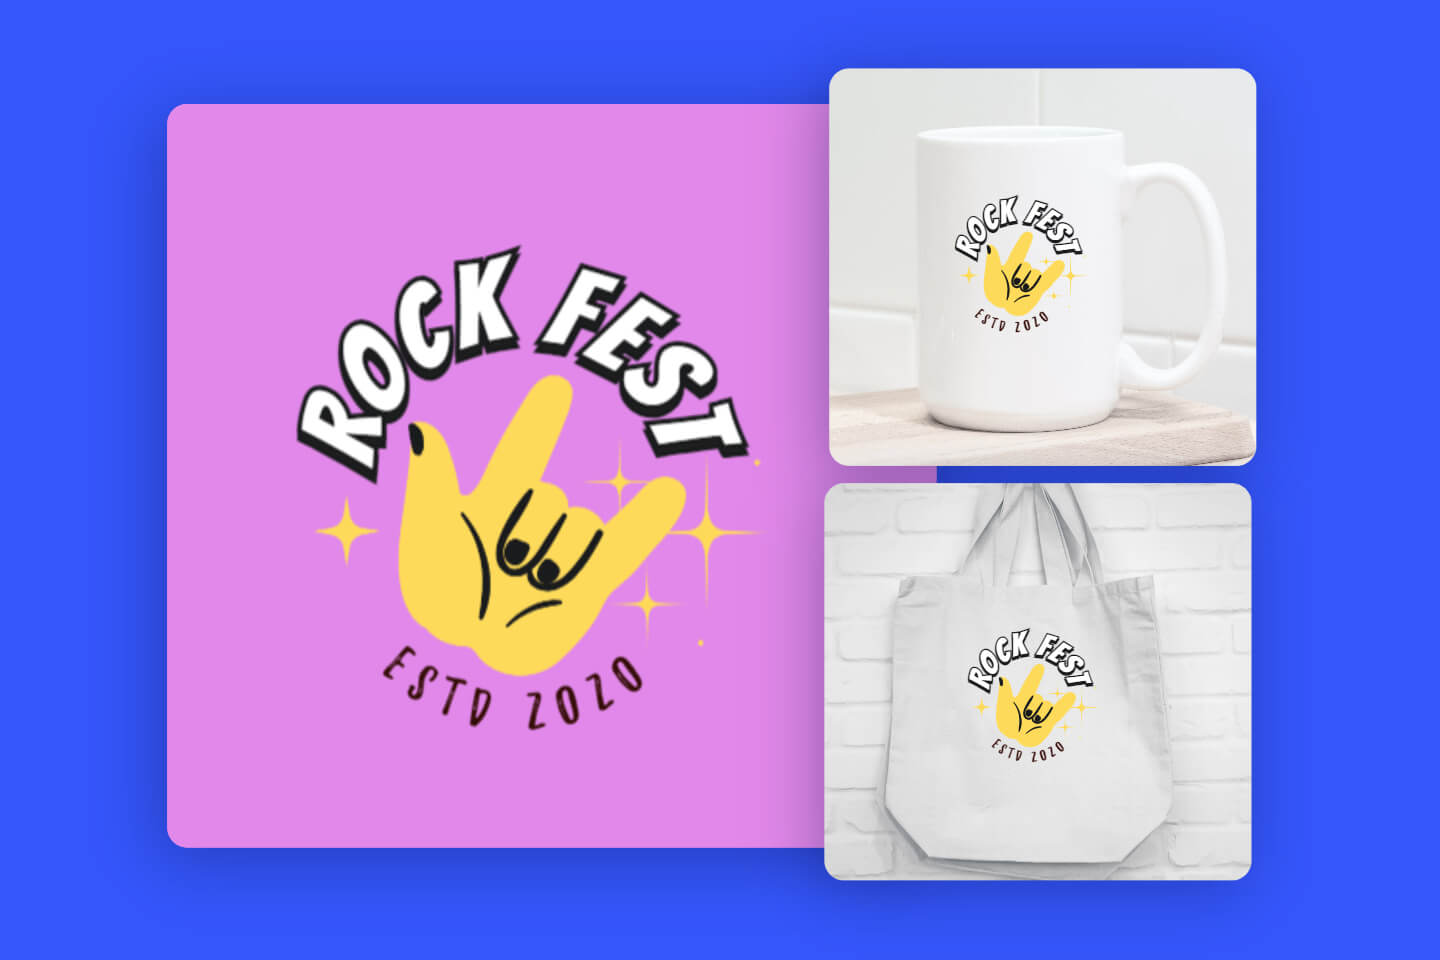 Use Fotors merch maker to design a rock logo and add it to mug and bag designs